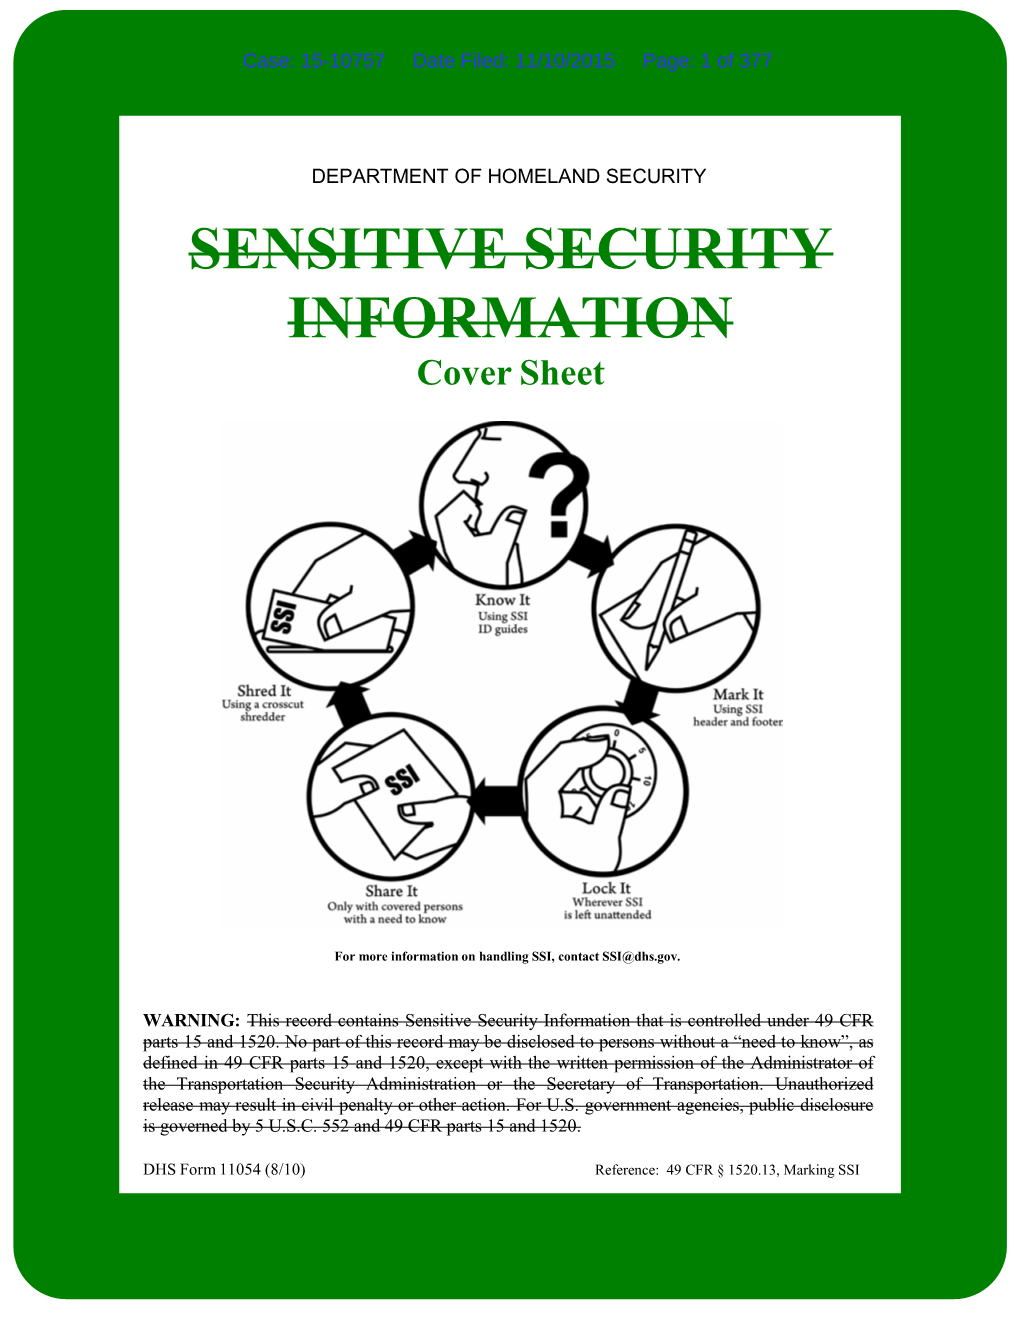 SENSITIVE SECURITY INFORMATION Cover Sheet